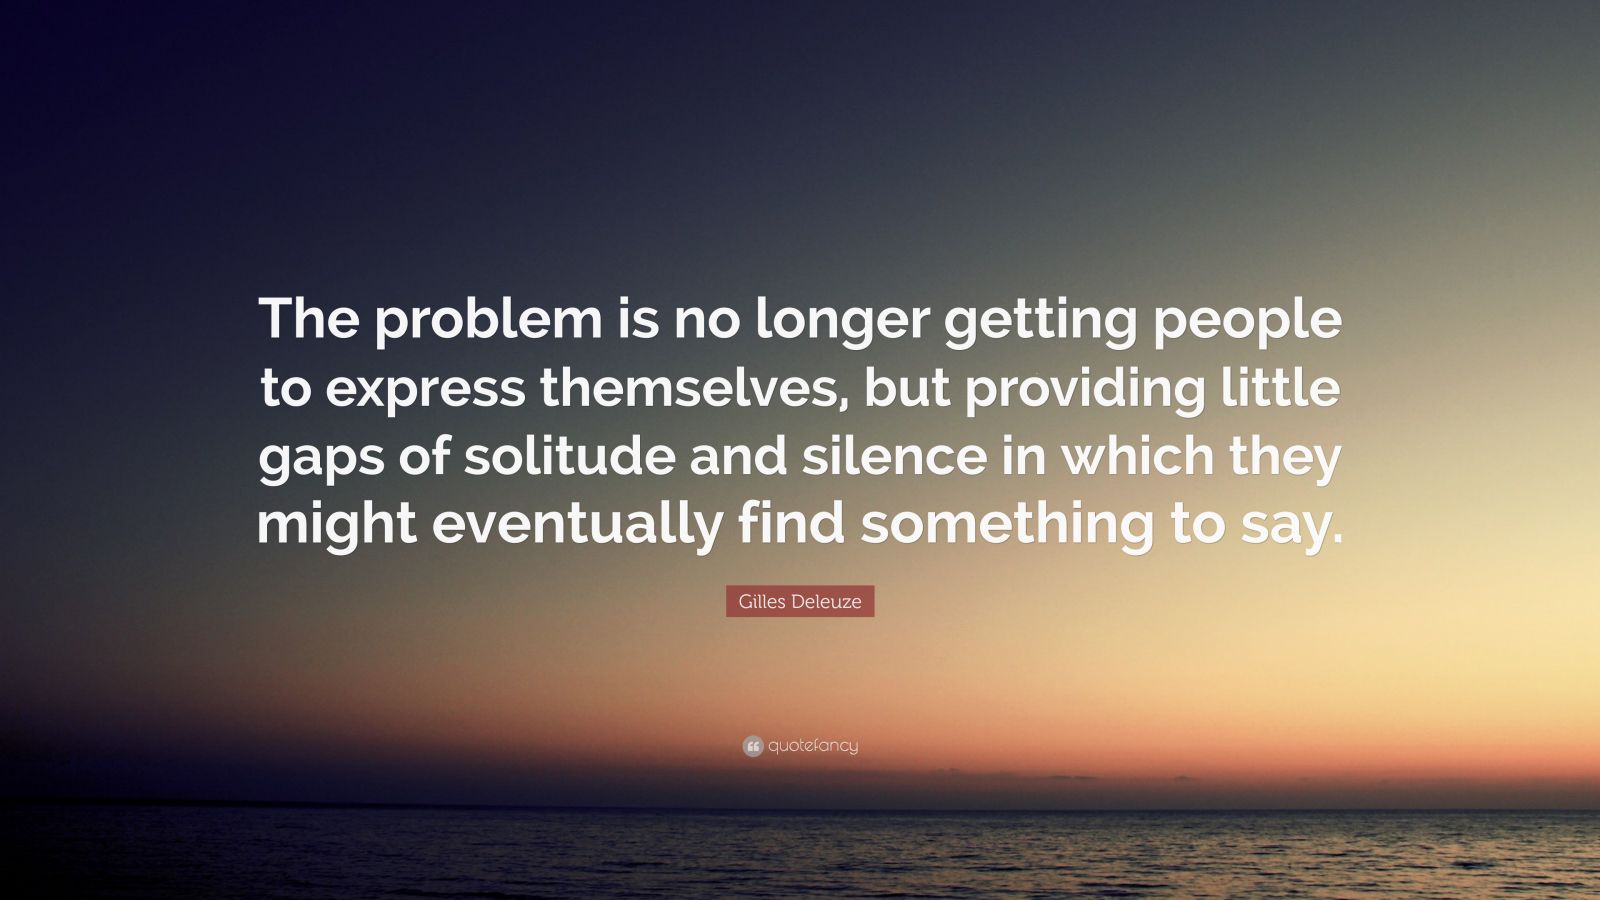 Gilles Deleuze Quote: “The problem is no longer getting people to ...